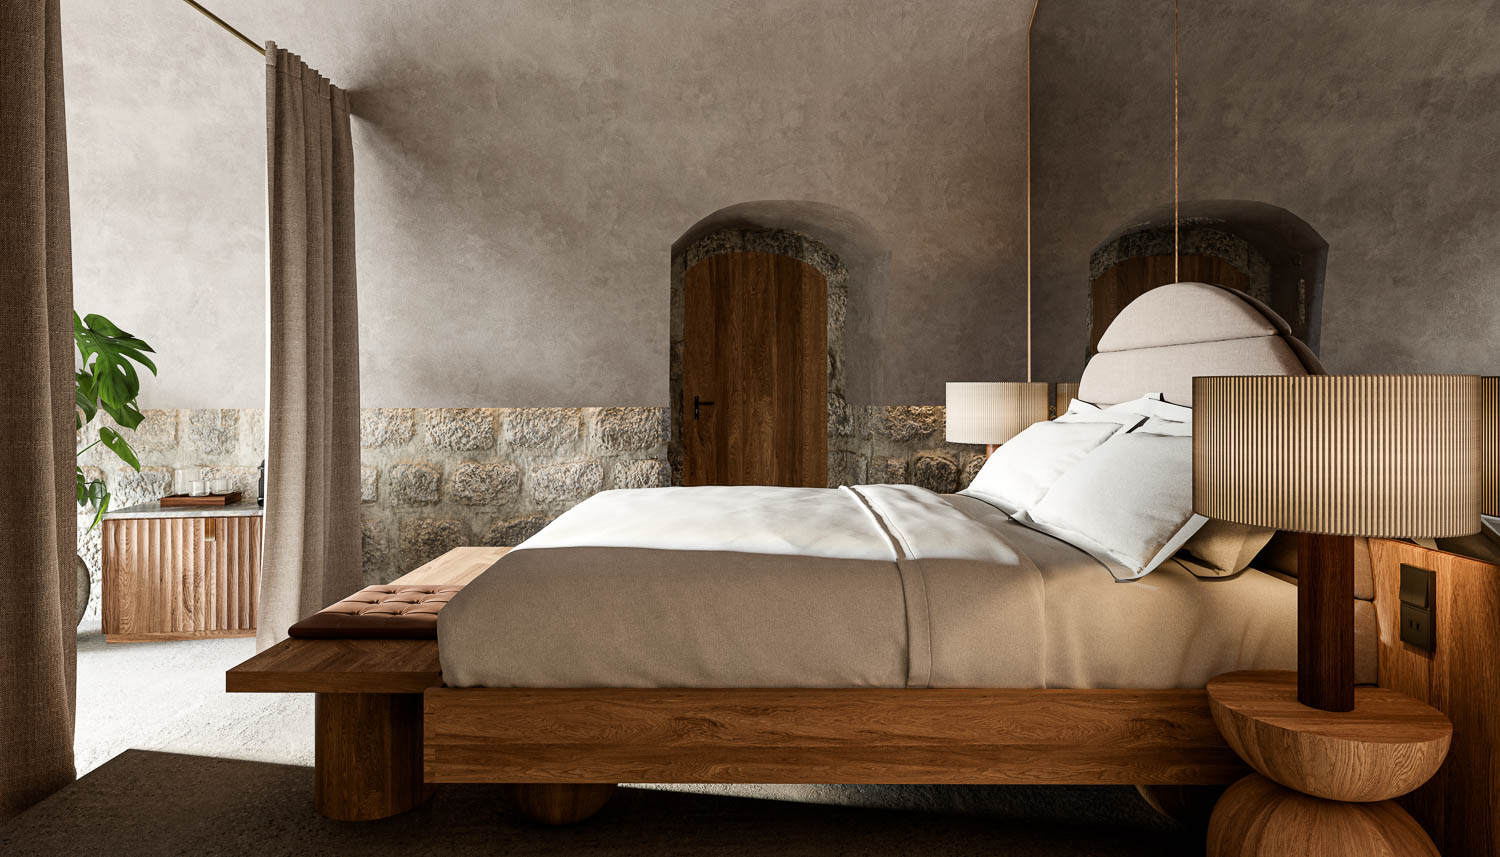 With only 26 rooms, Mamula Island combines the former with the contemporary